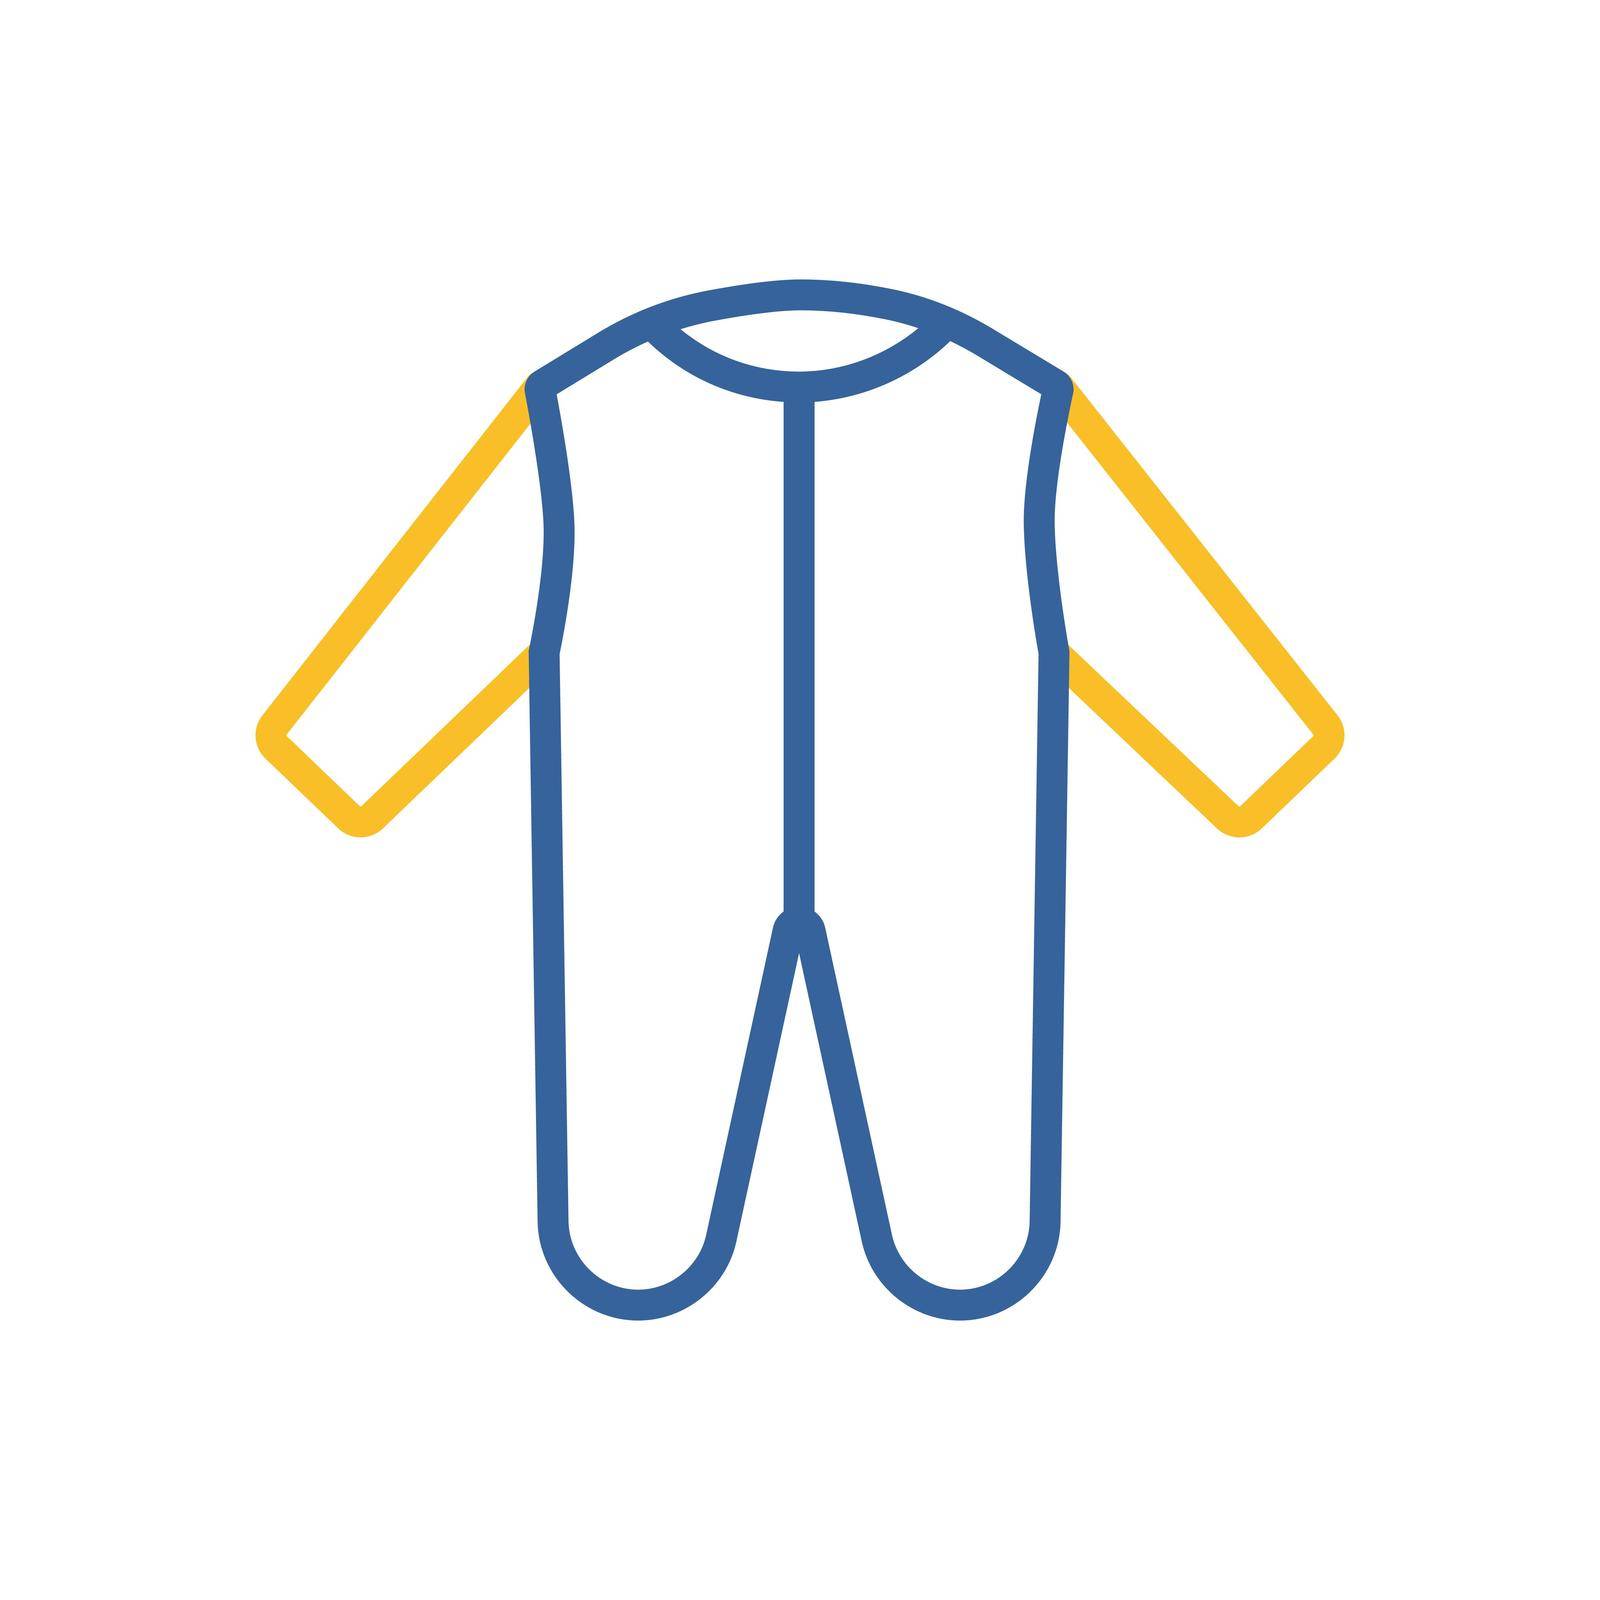 Baby bodysuit vector icon. Baby Romper. Graph symbol for children and newborn babies web site and apps design, logo, app, UI